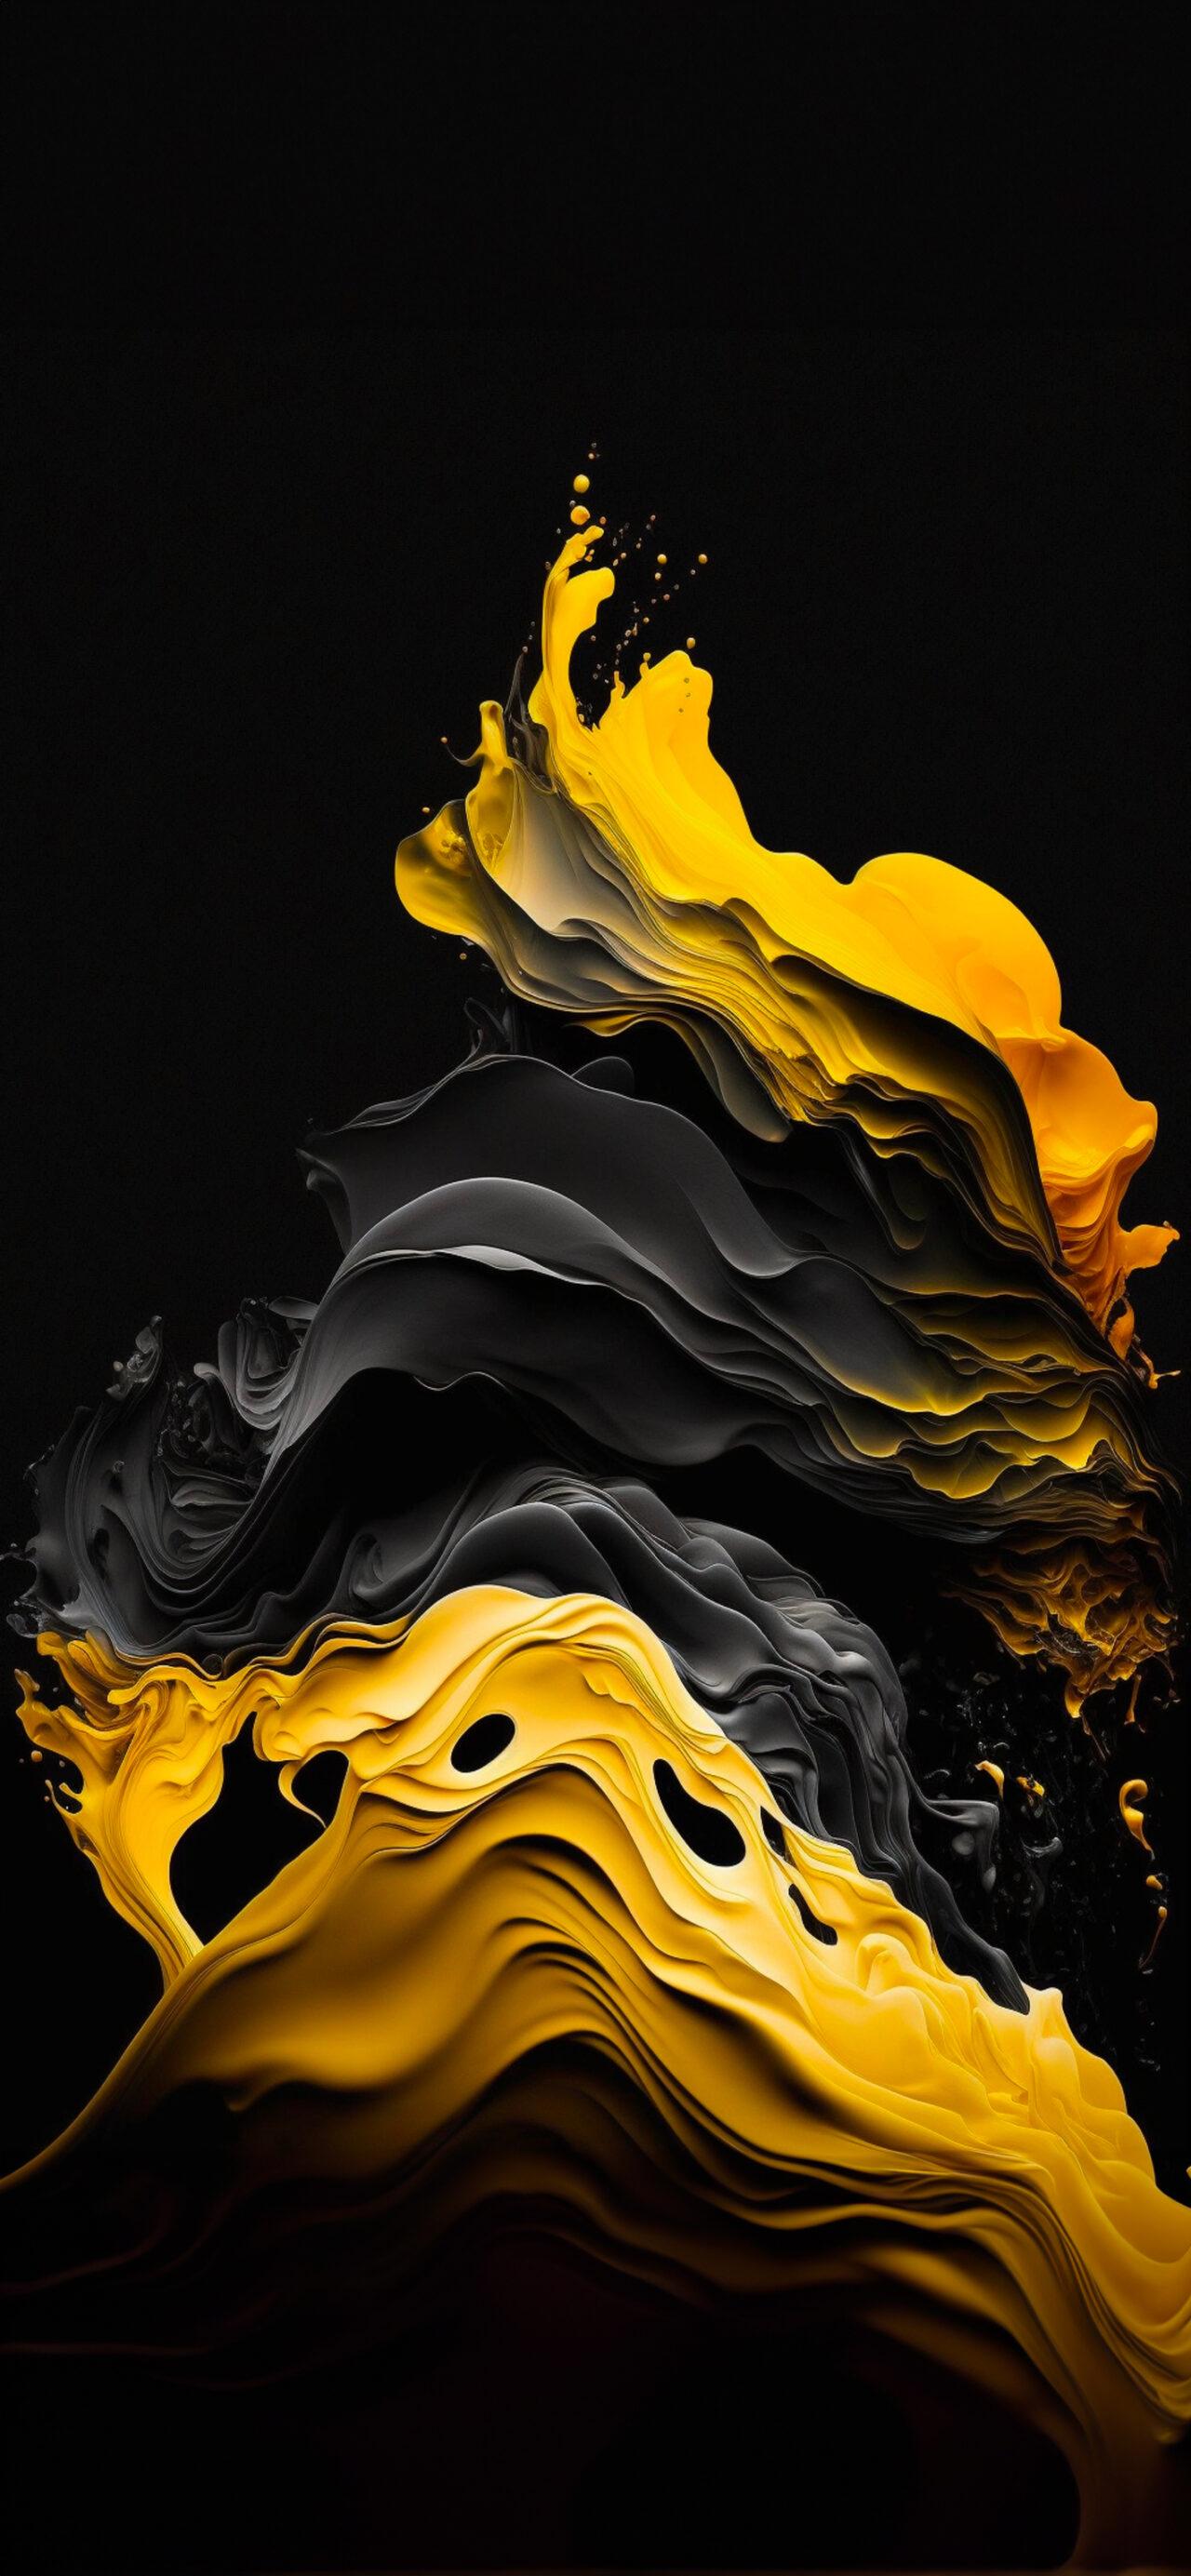 Water Color Gold And Black Oled Wallpaper Central